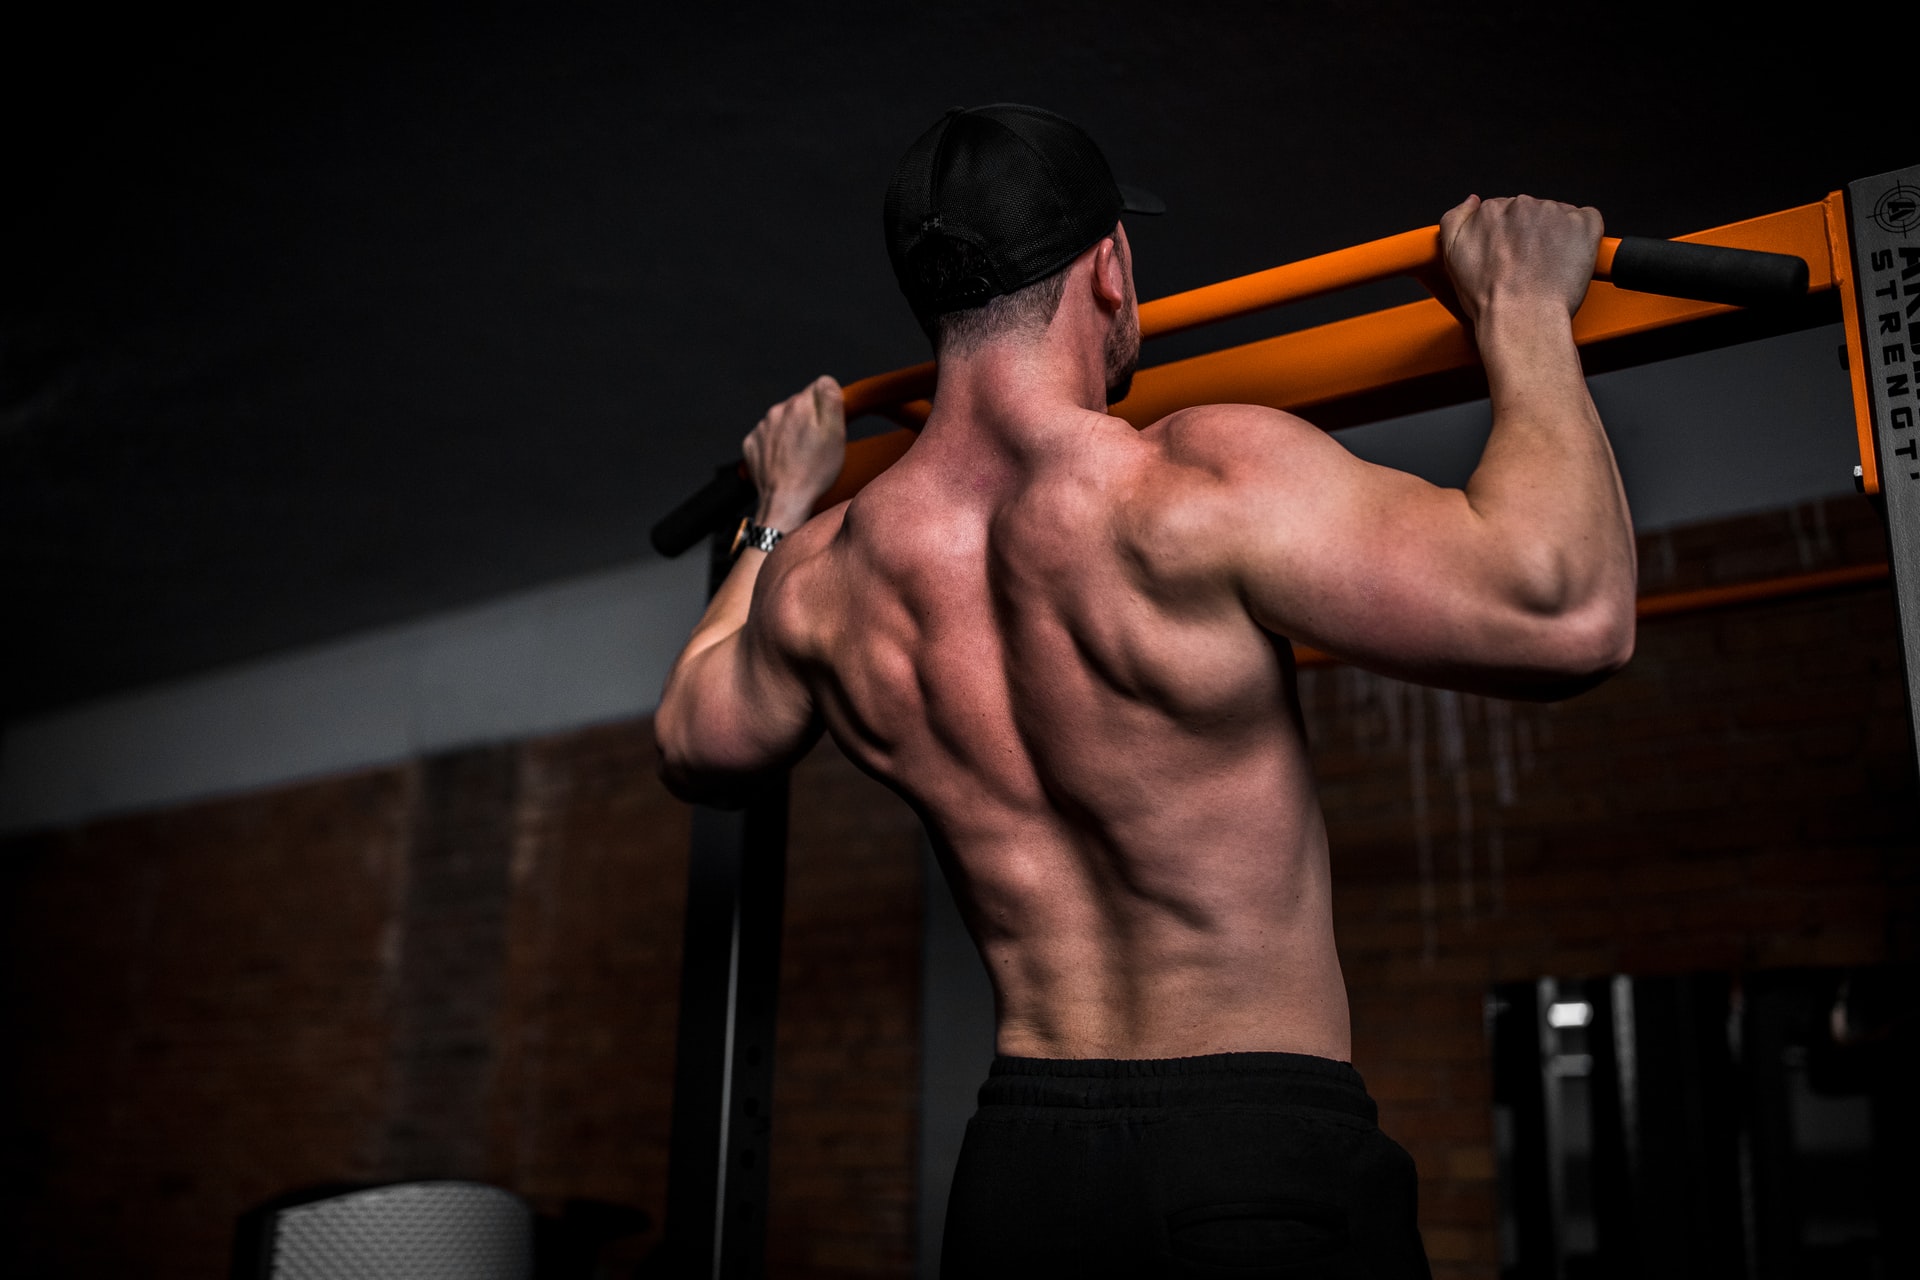 Side Effects and Benefits Of Using These Steroids